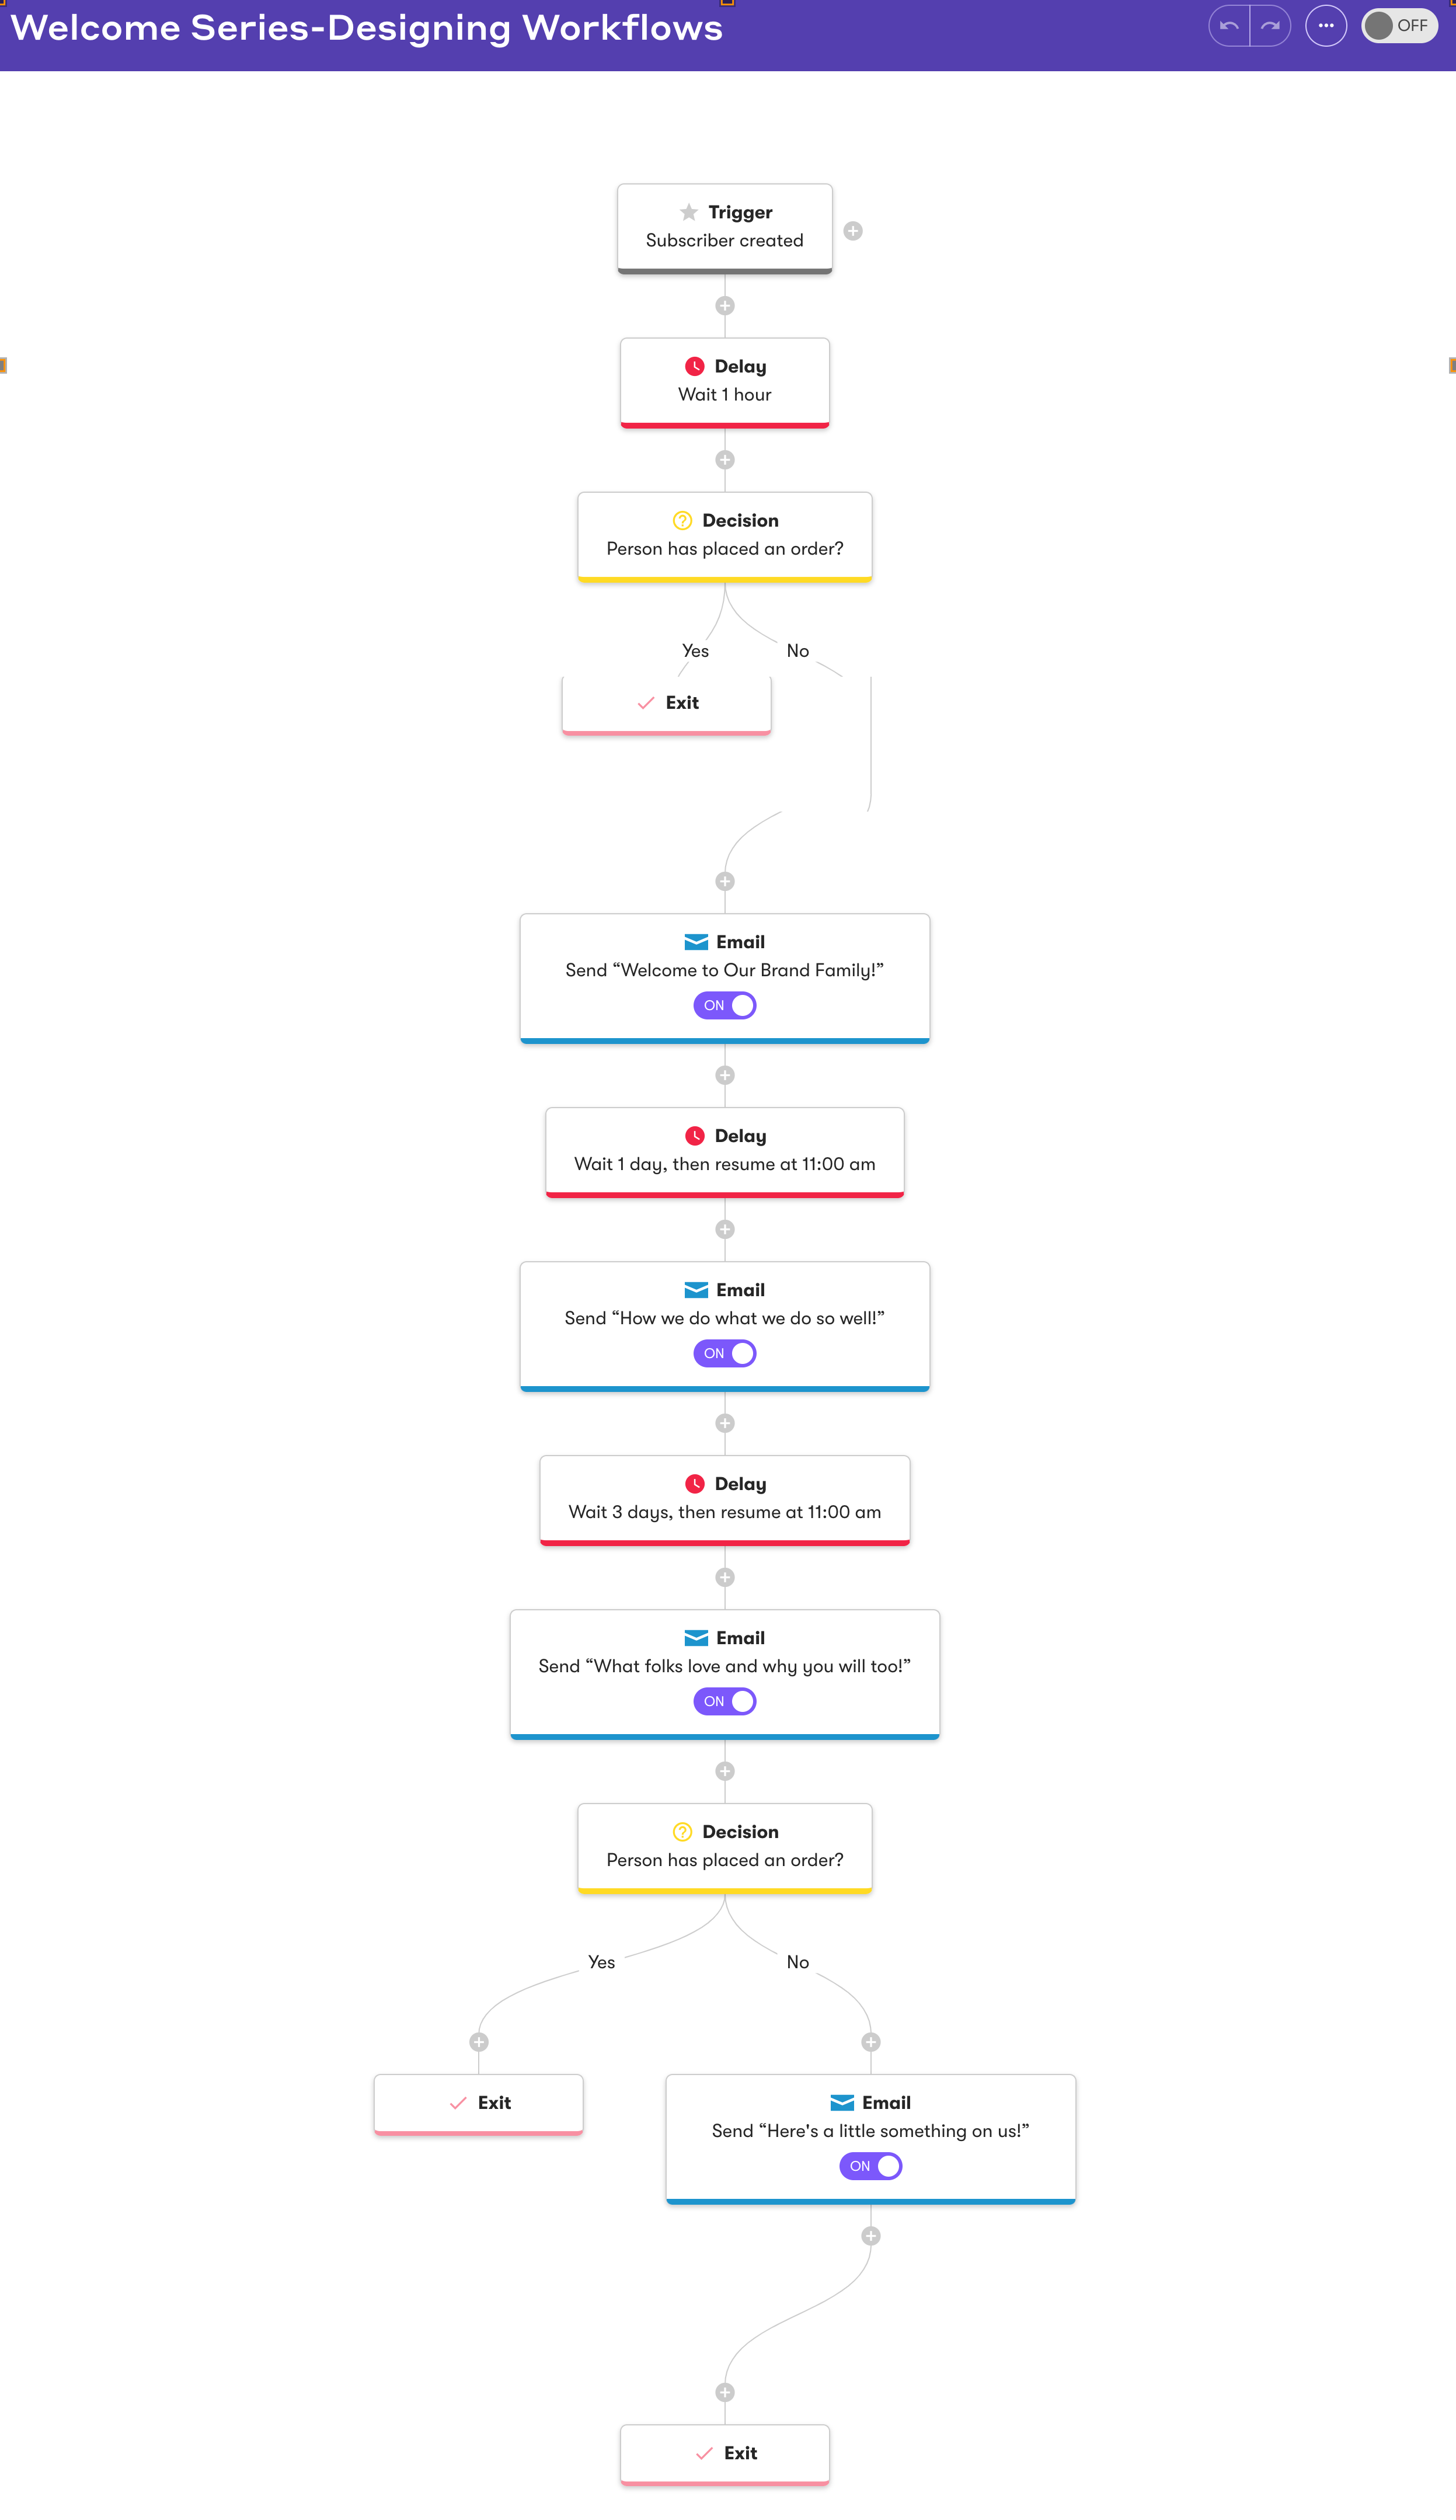 Example of a Workflow with a trigger of subscriber created to send a series of Welcome emails